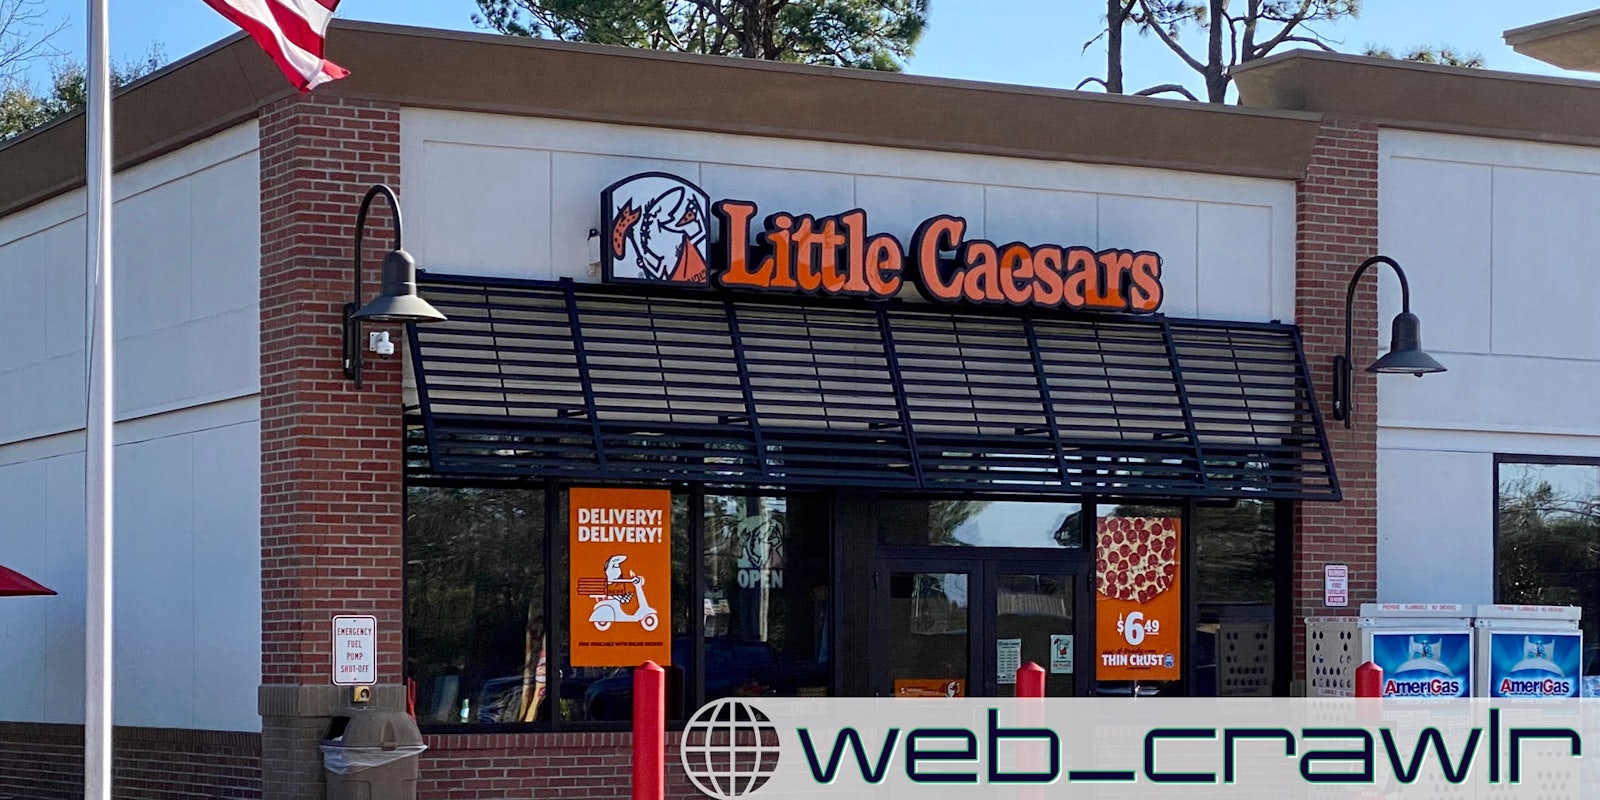 A Little Caesars location. The Daily Dot newsletter web_crawlr logo is in the bottom right corner.